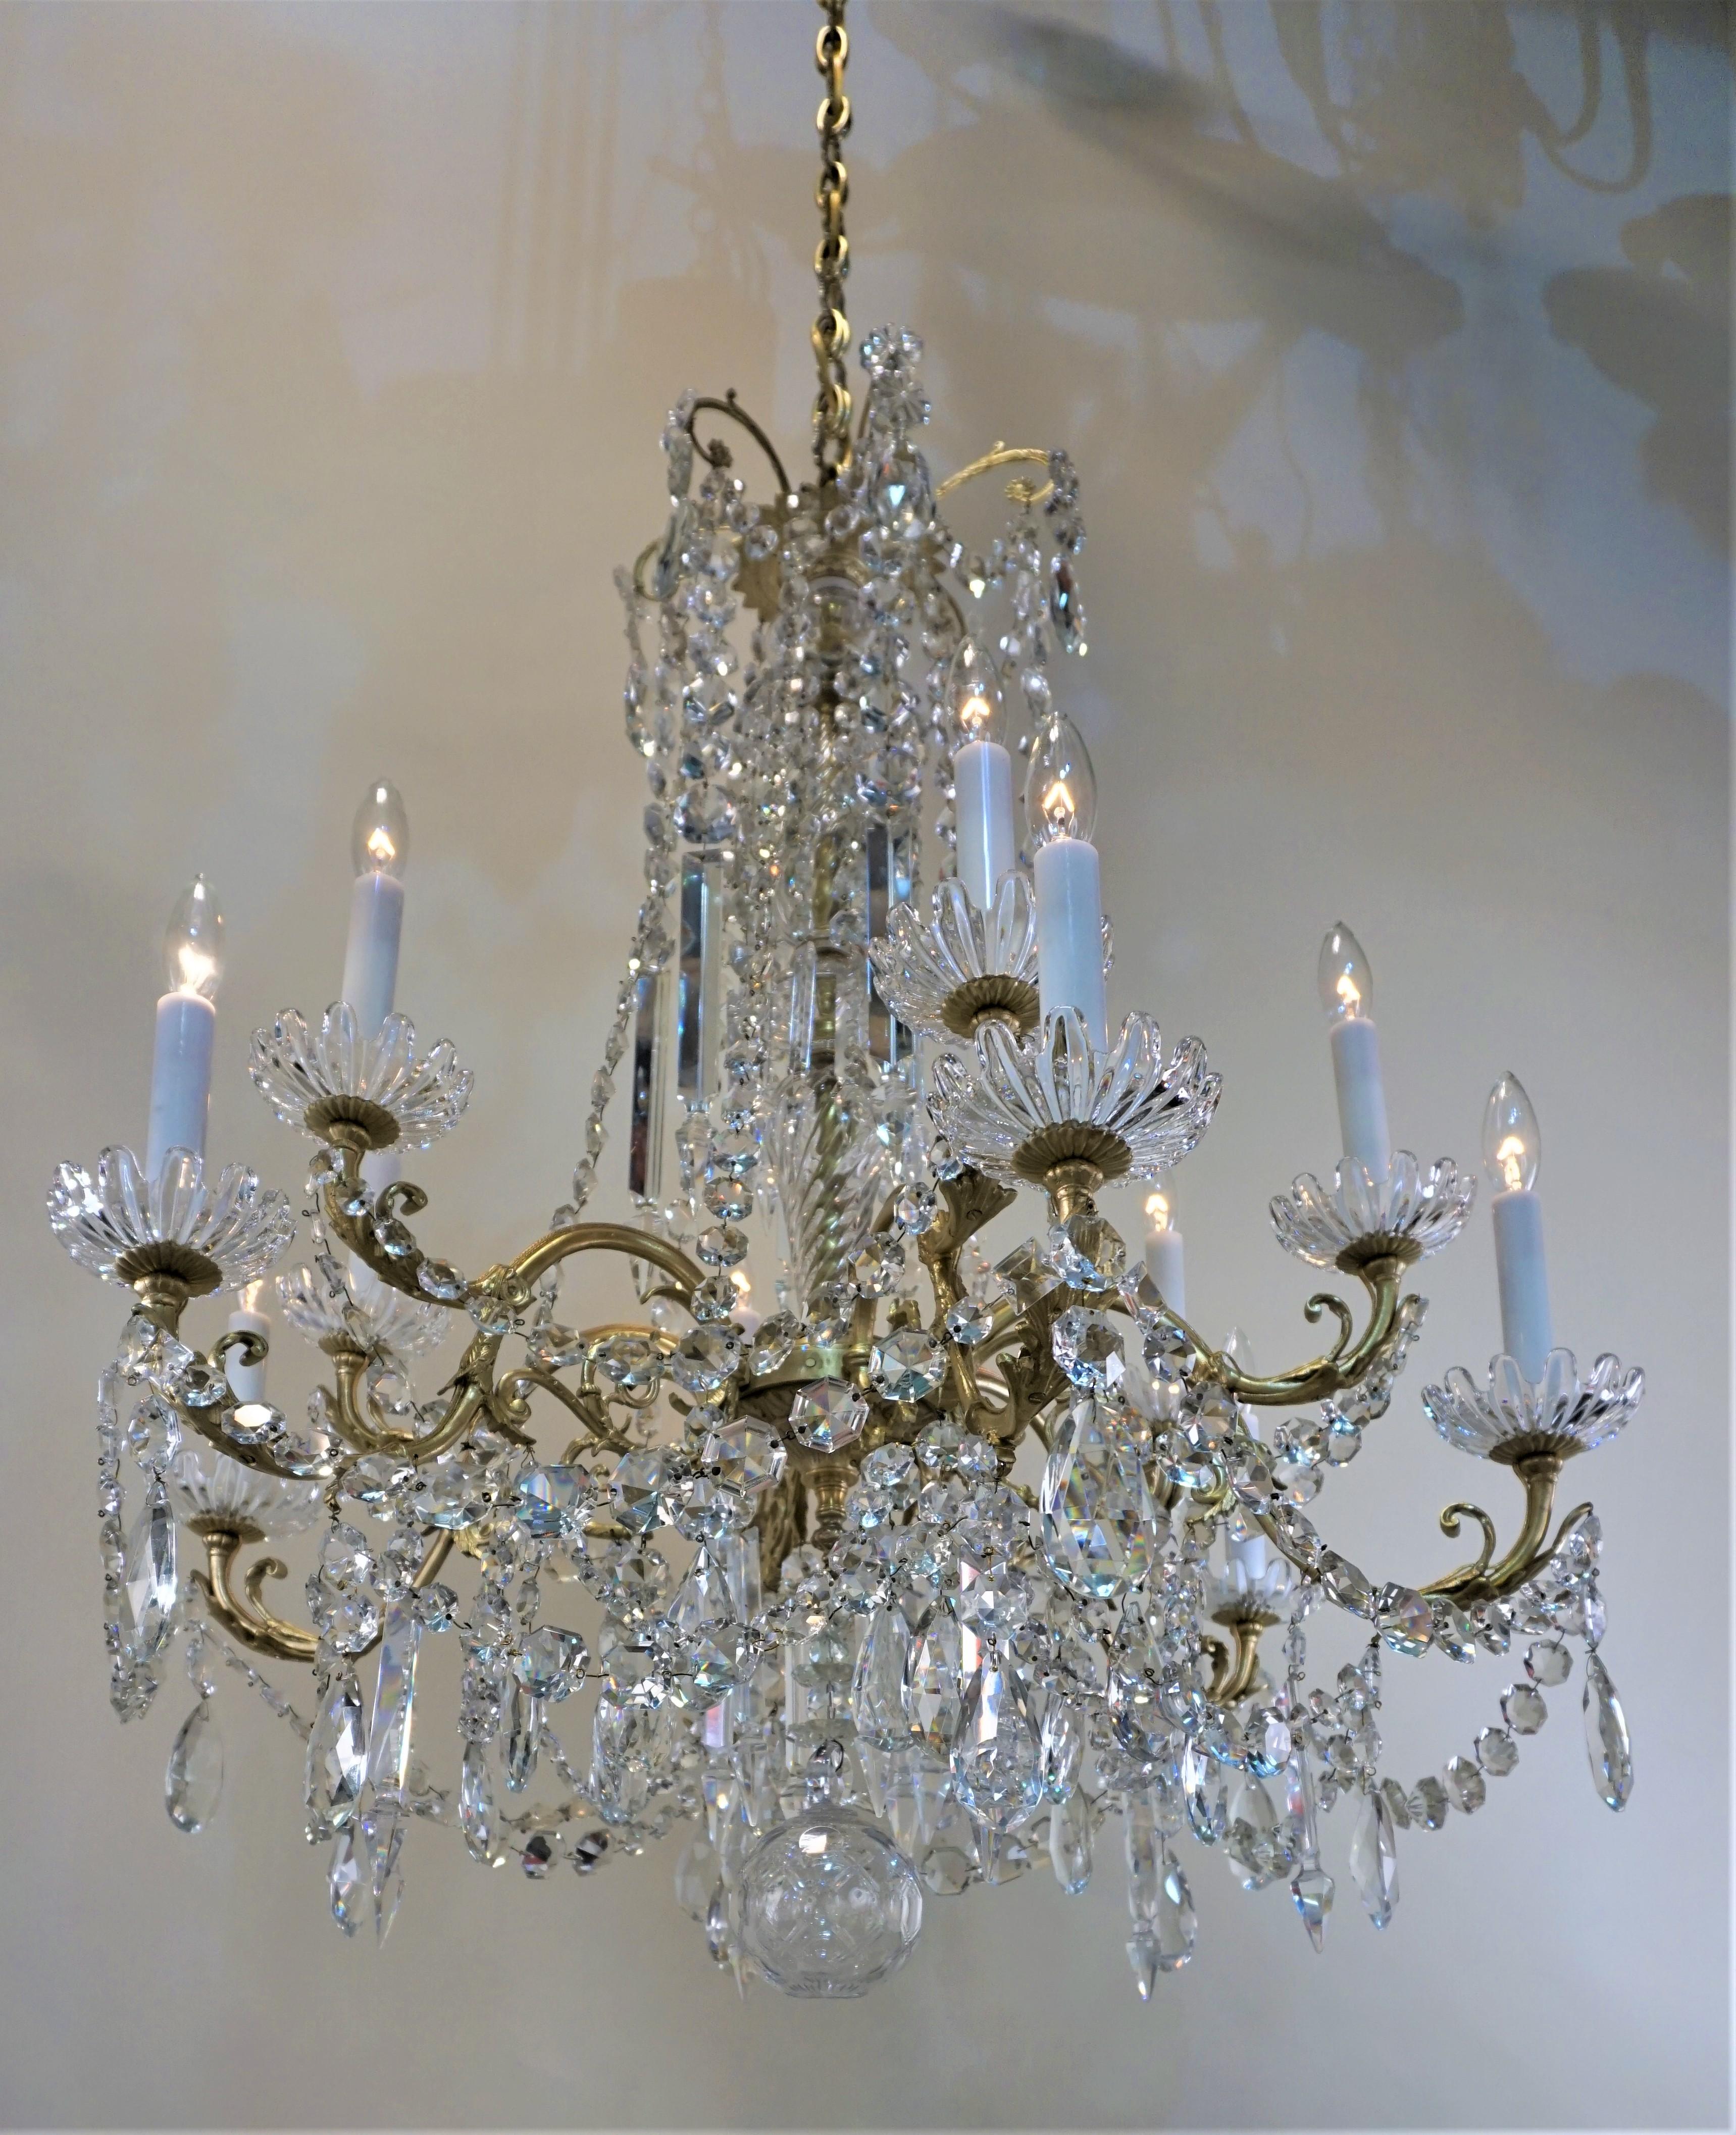 Elegant twelve-light crystal chandelier. This outstanding sign chandelier is crafted by Baccarat during 19th century in France.
Measurement body 32 width 38